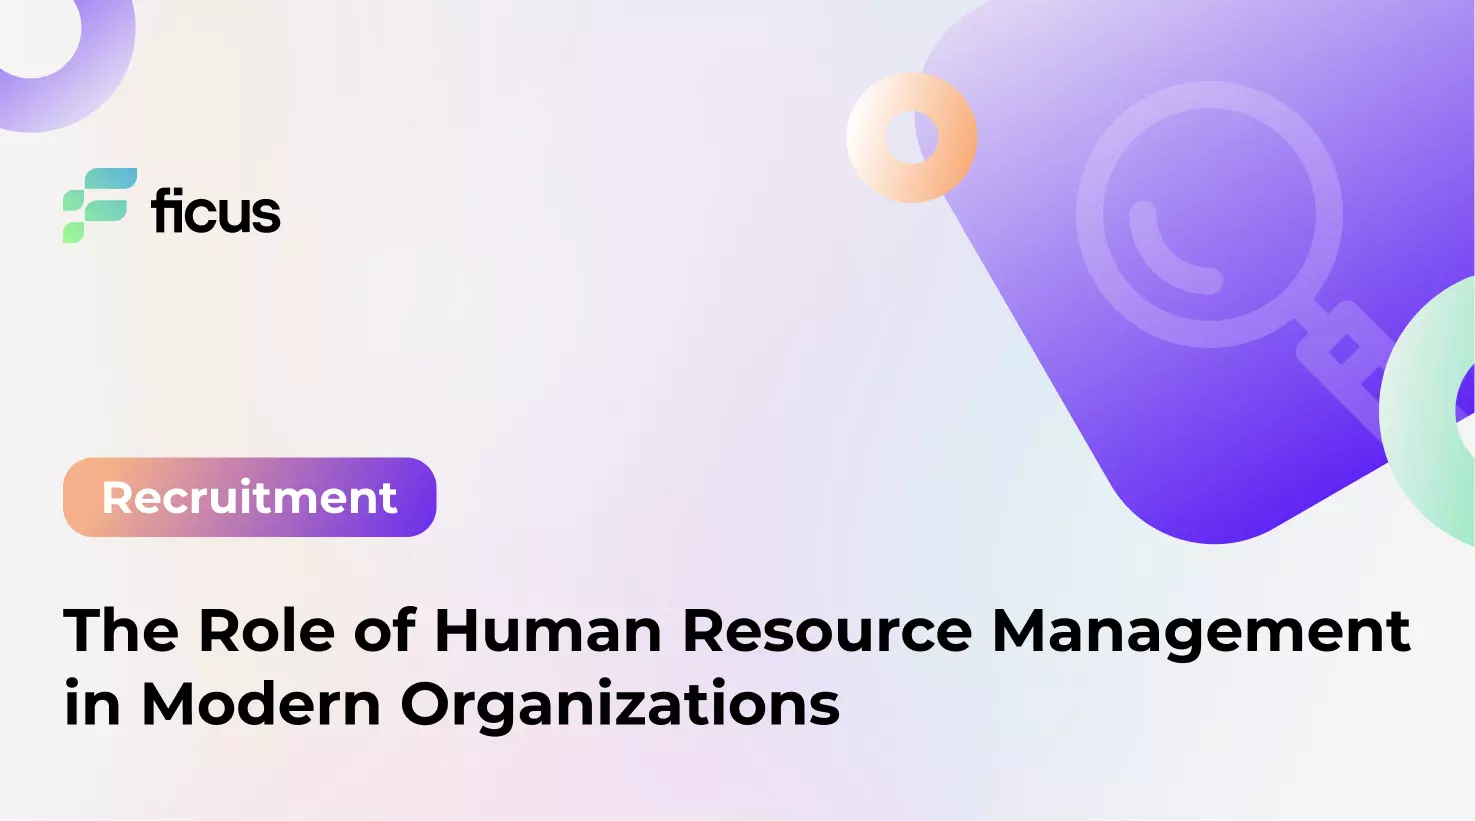 4_The Role of Human Resource Management in Modern Organizations